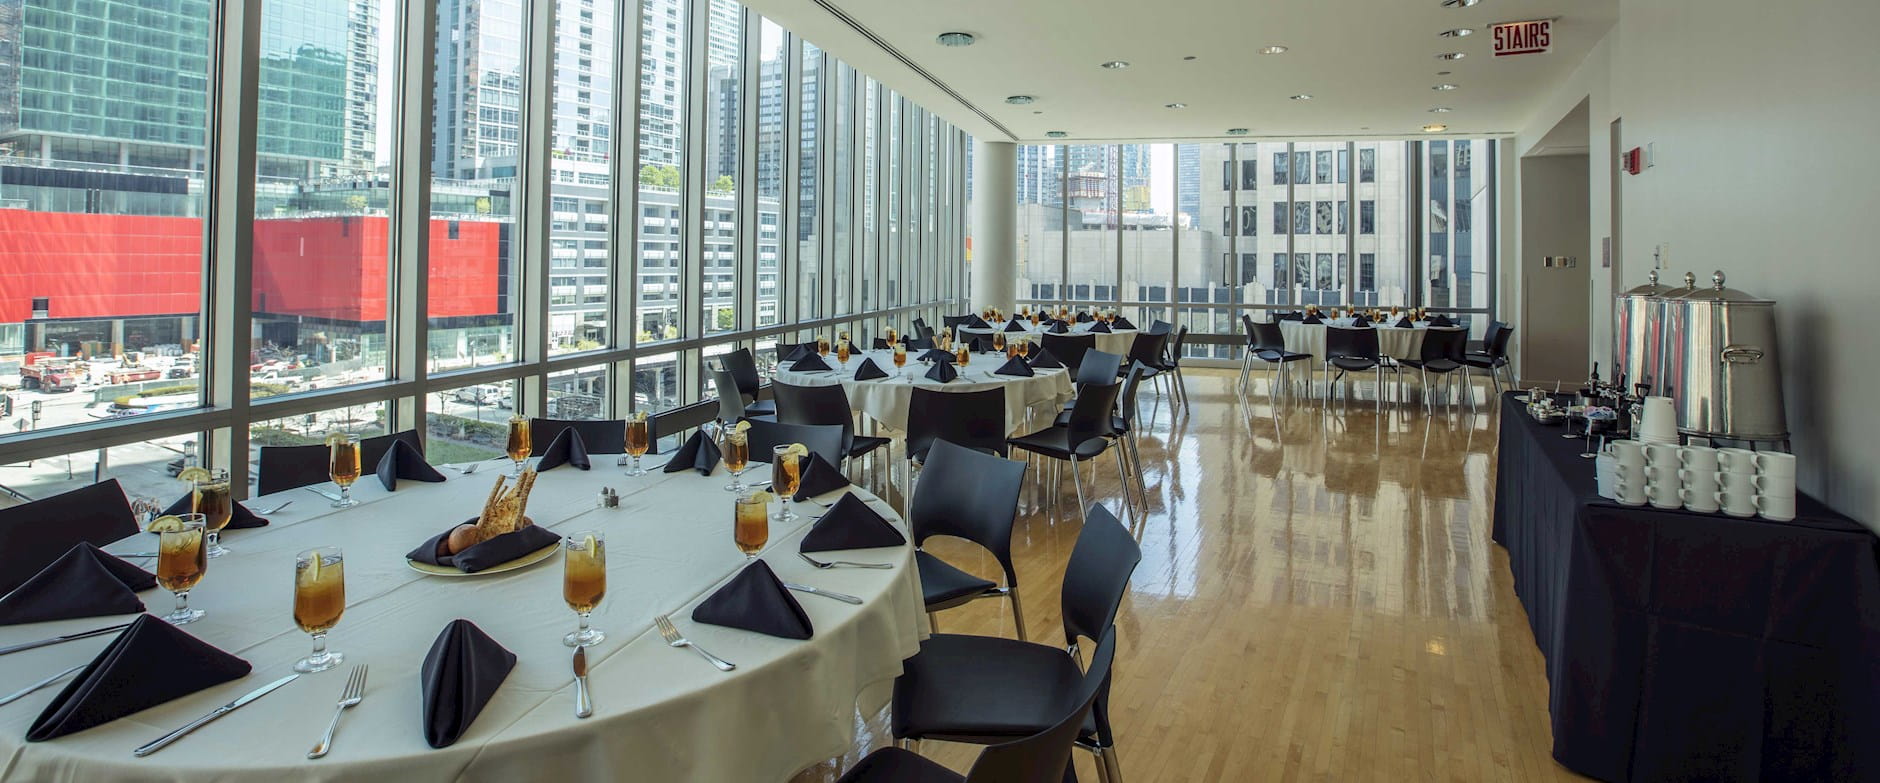 Looking out over the plaza from a small dining room in Gleacher Center with circular tables surrounded by chairs